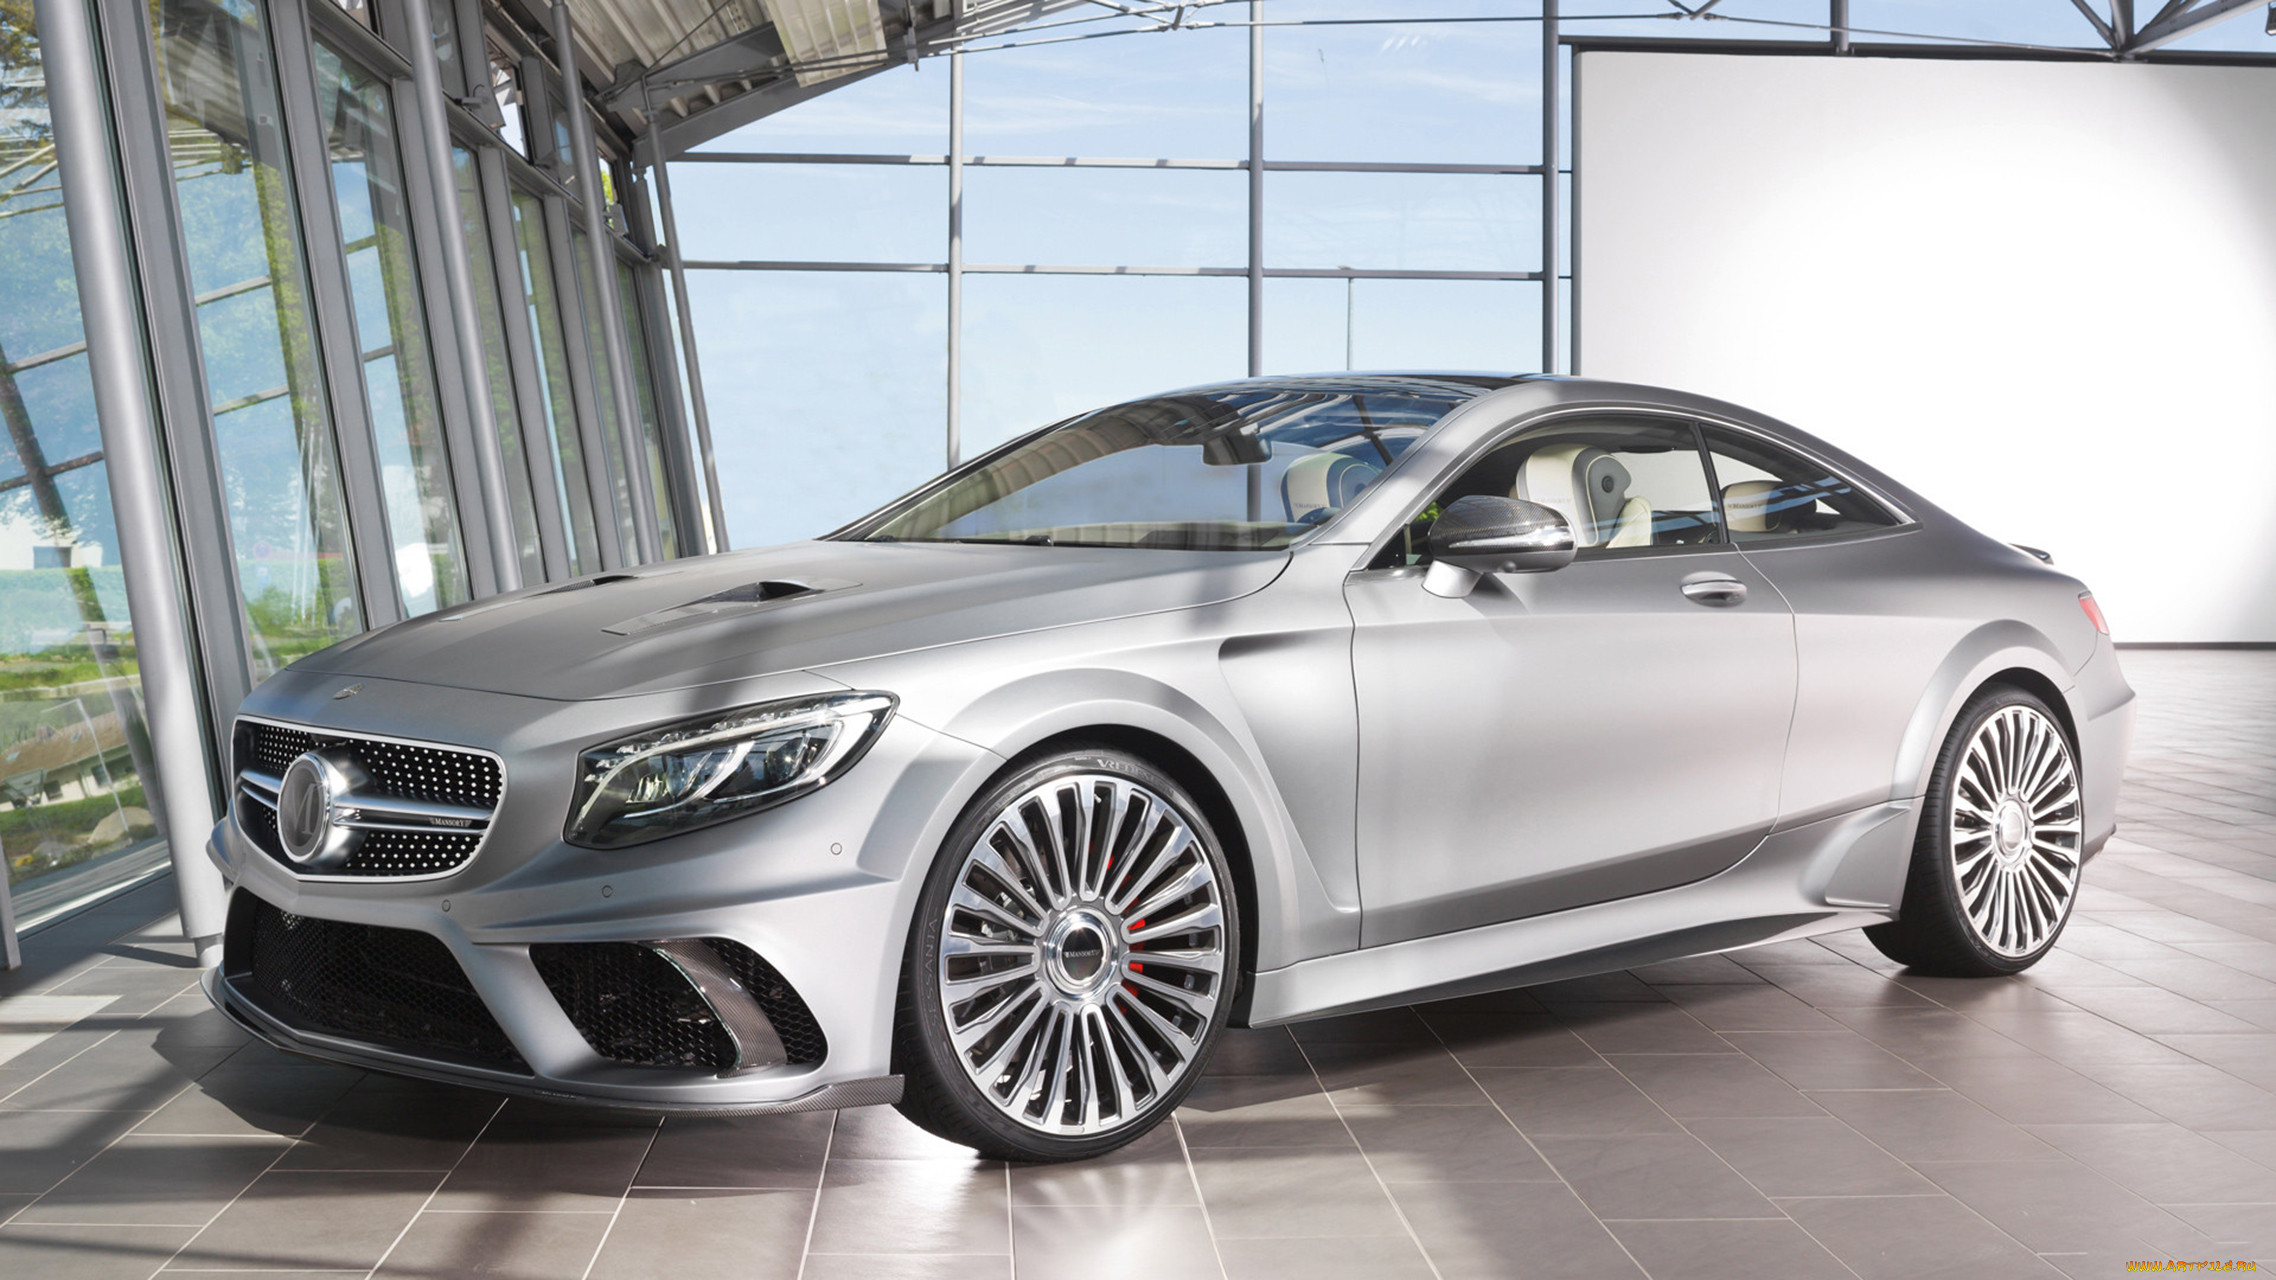 mansory mercedes-benz s63 amg coupe 2015, , mercedes-benz, mansory, s63, amg, coupe, 2015